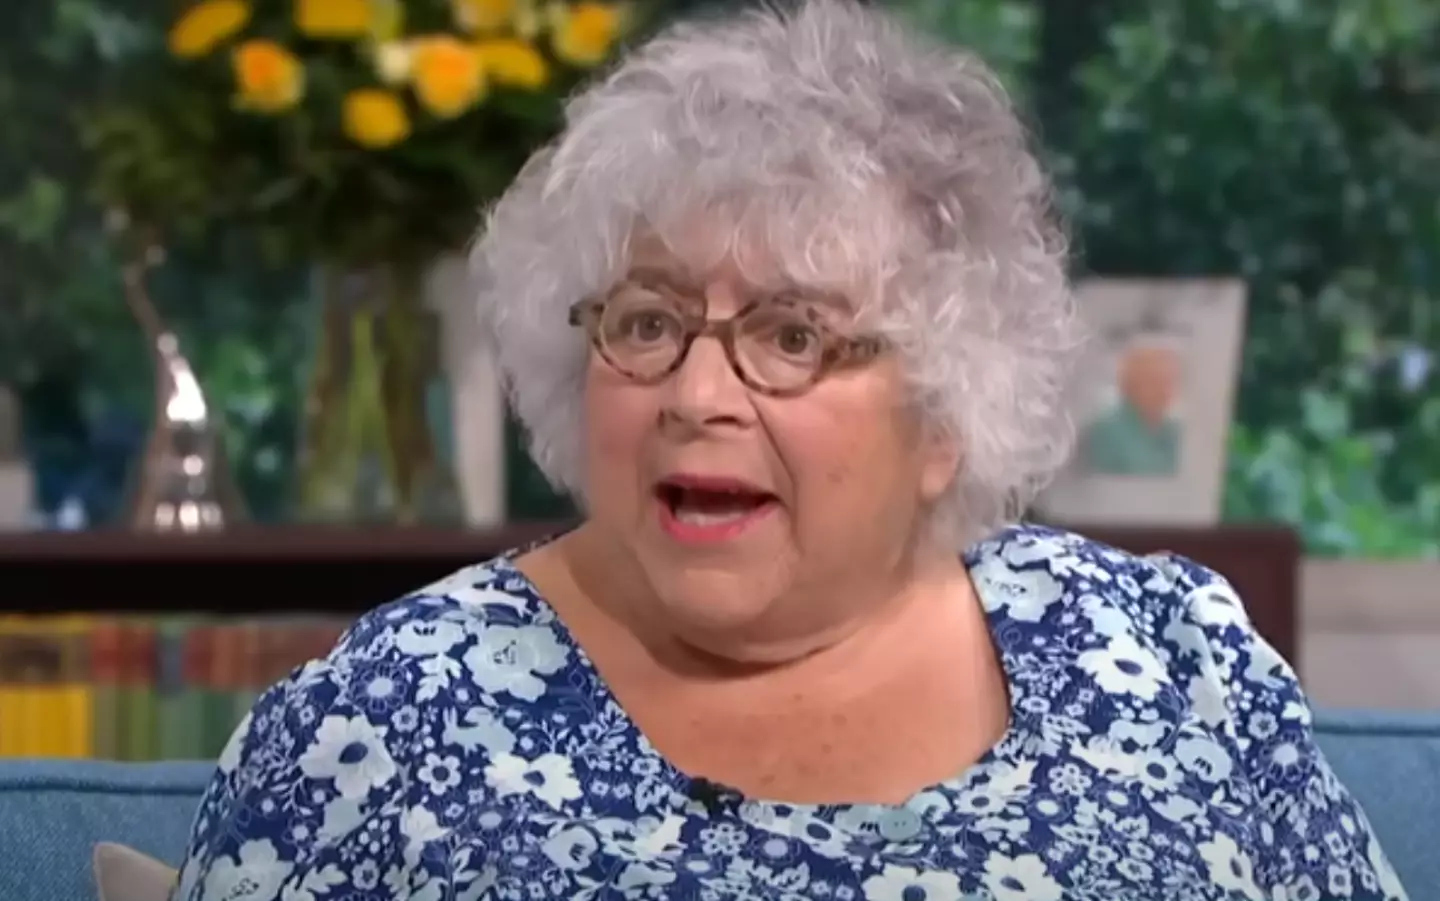 Miriam Margolyes has opened up about her health troubles.